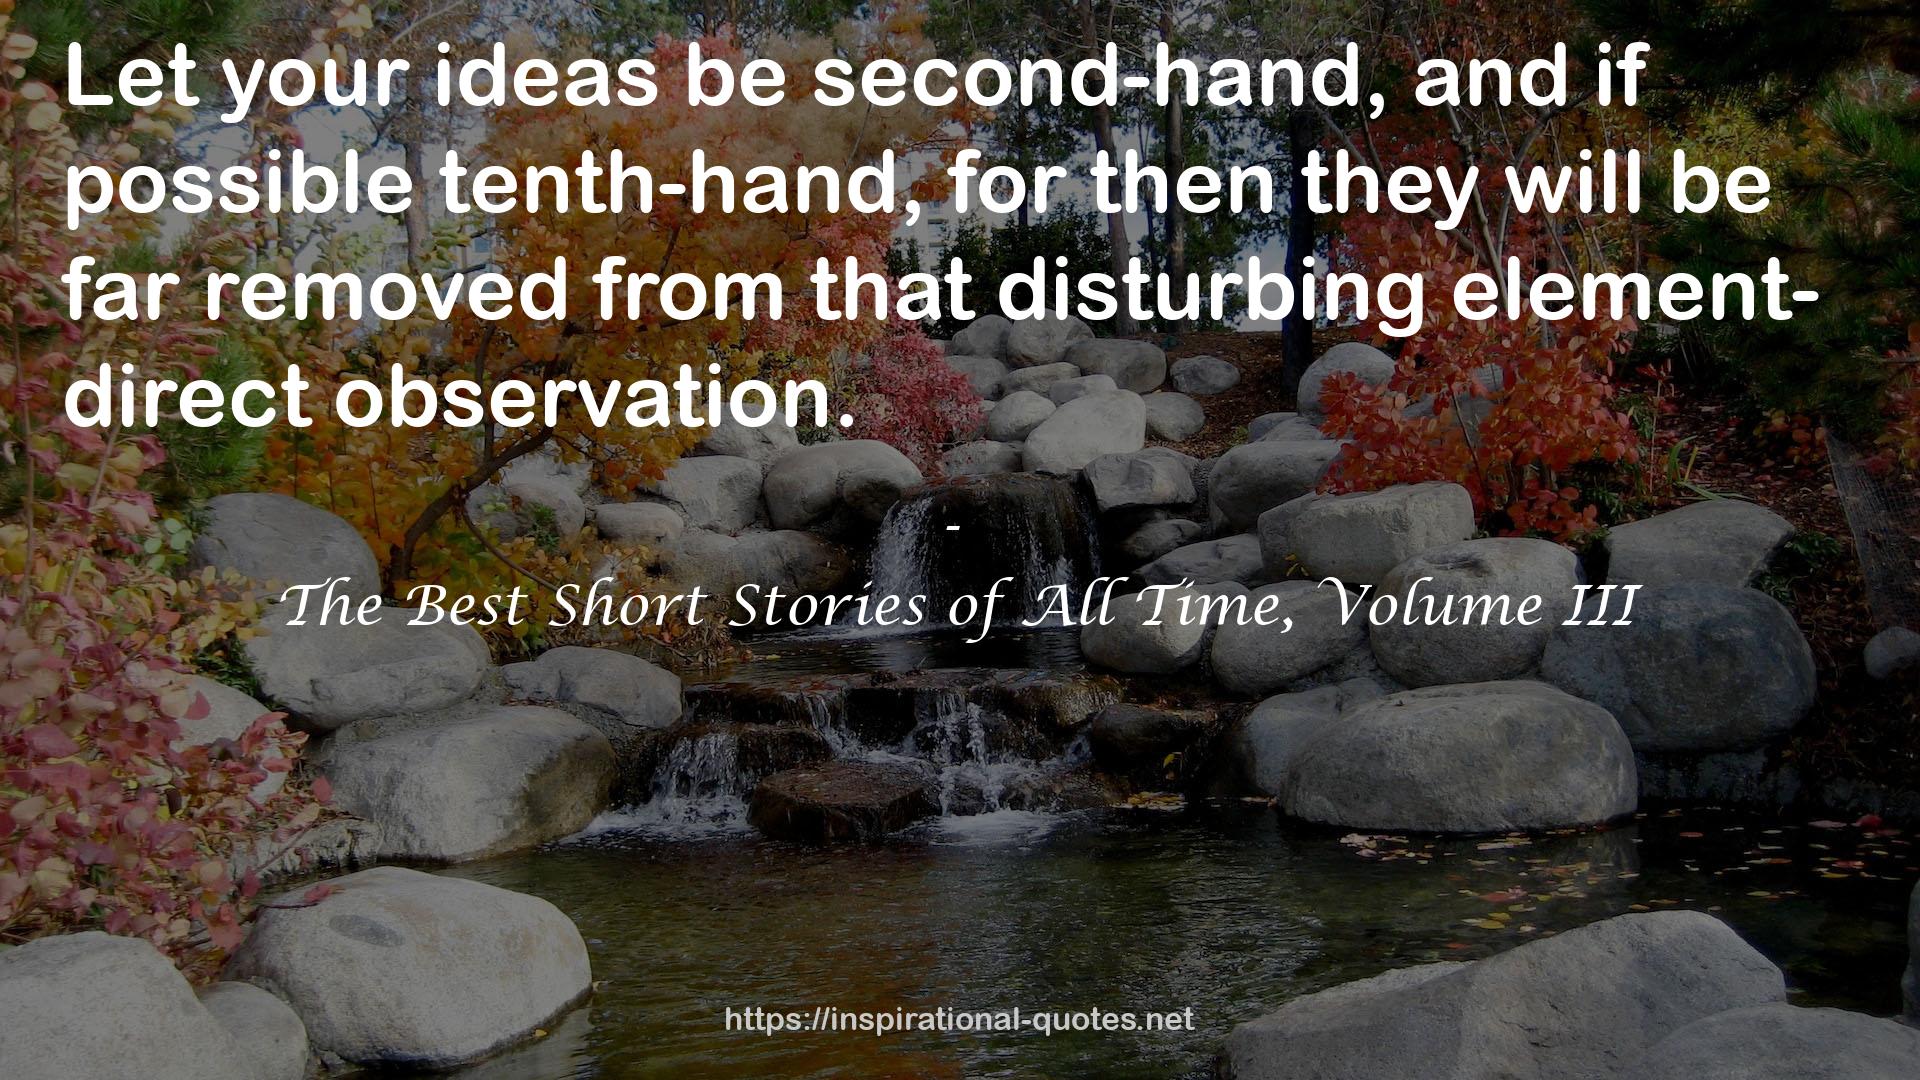 The Best Short Stories of All Time, Volume III QUOTES